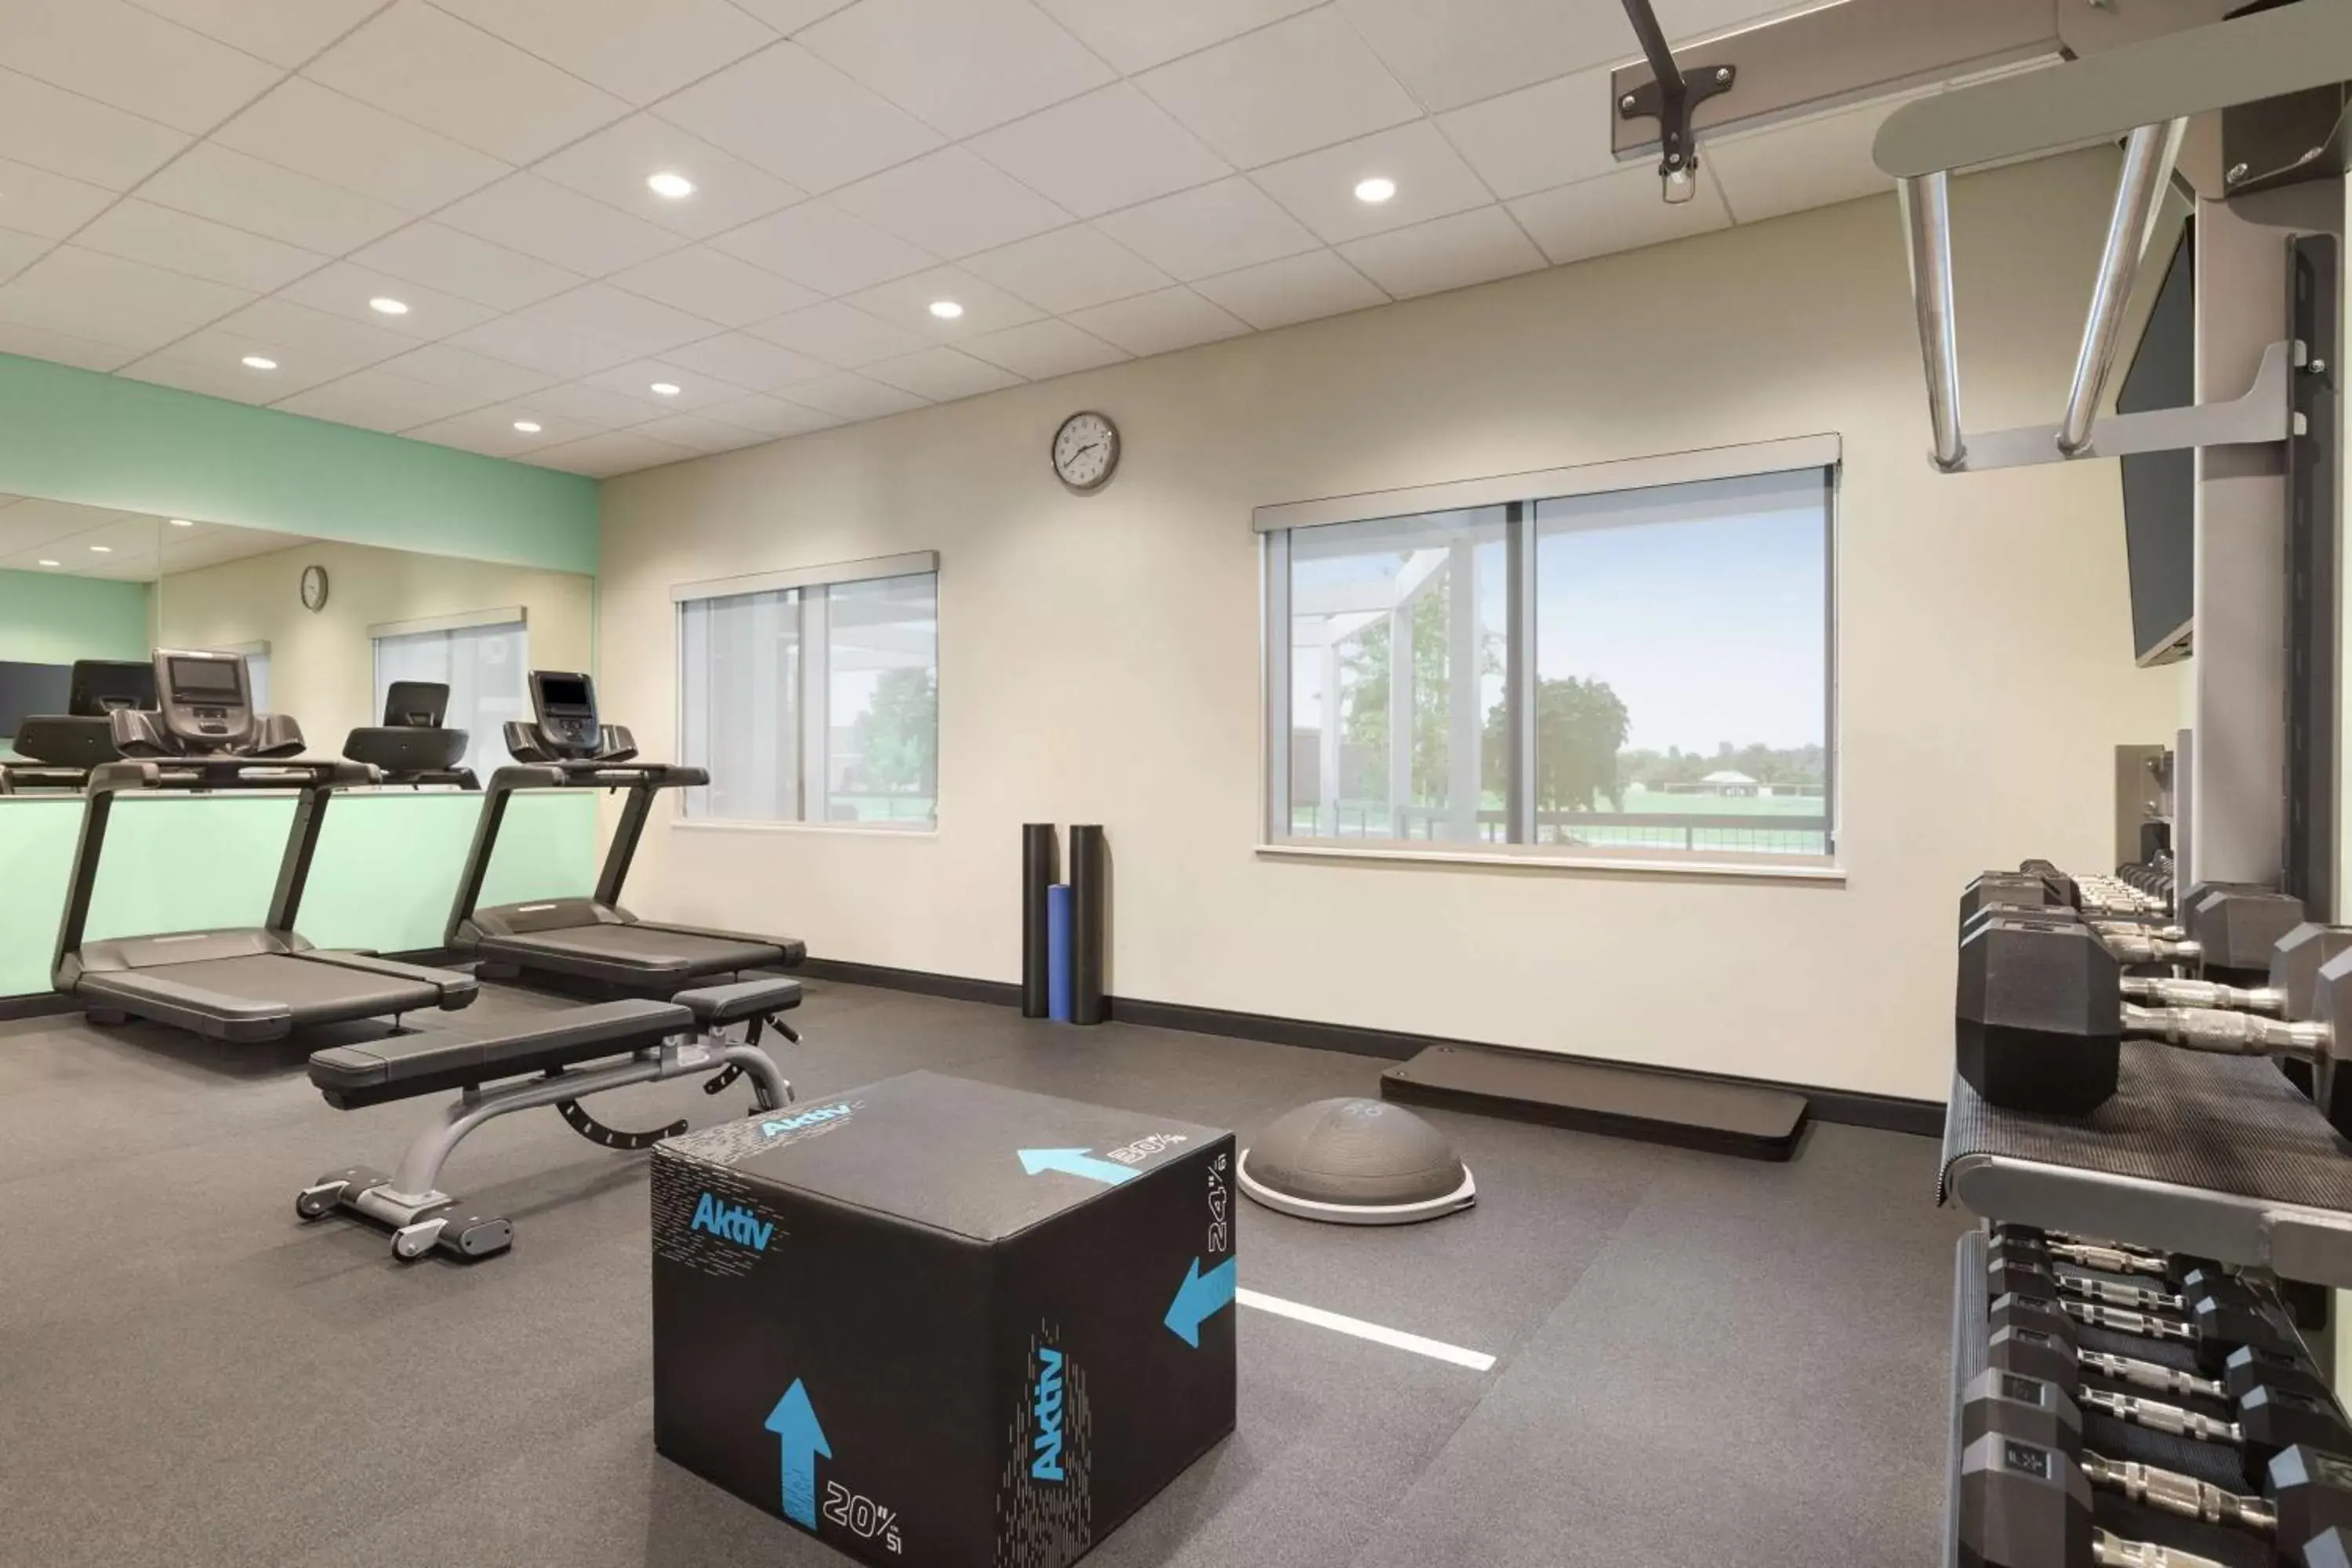 Fitness centre/facilities, Fitness Center/Facilities in Tru By Hilton Ringgold, Ga